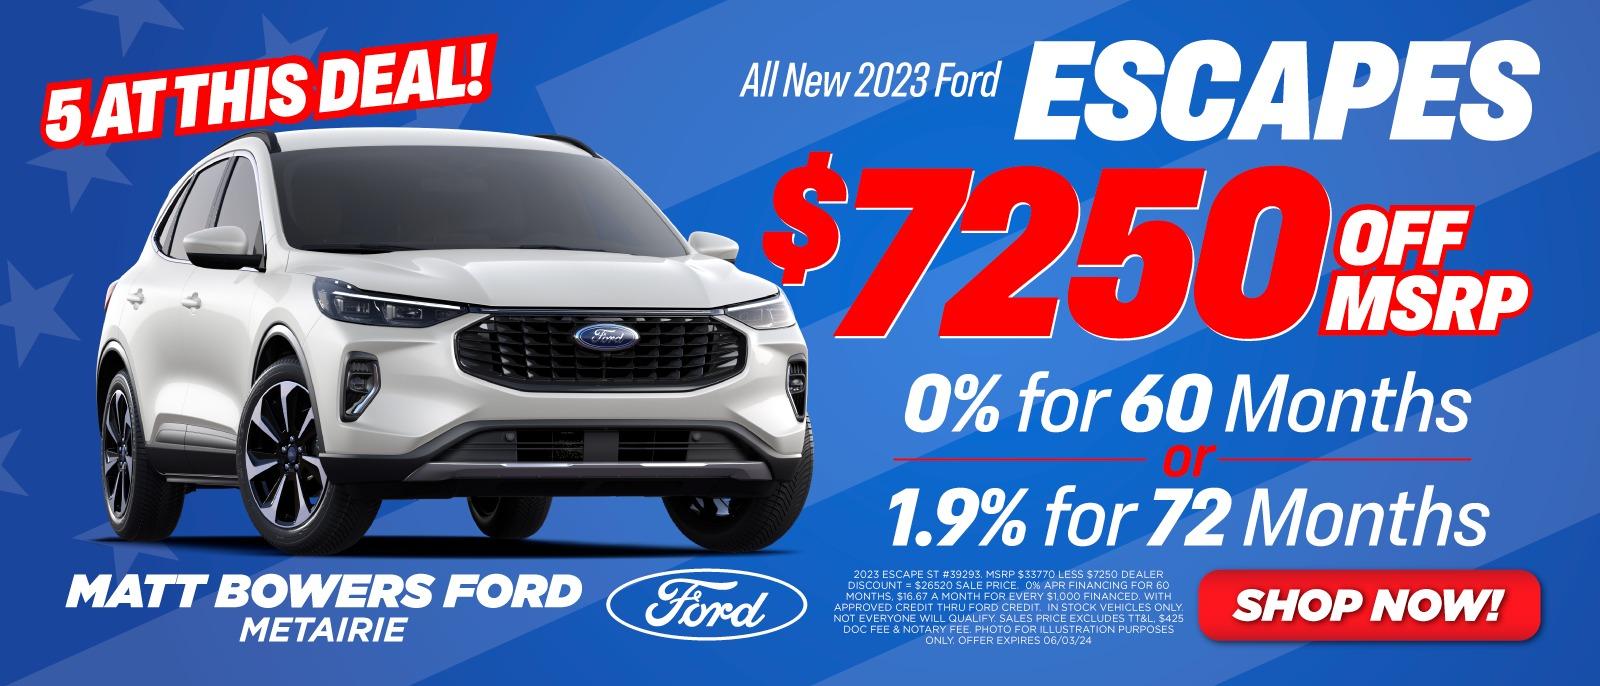 2023 Ford Escape Deal